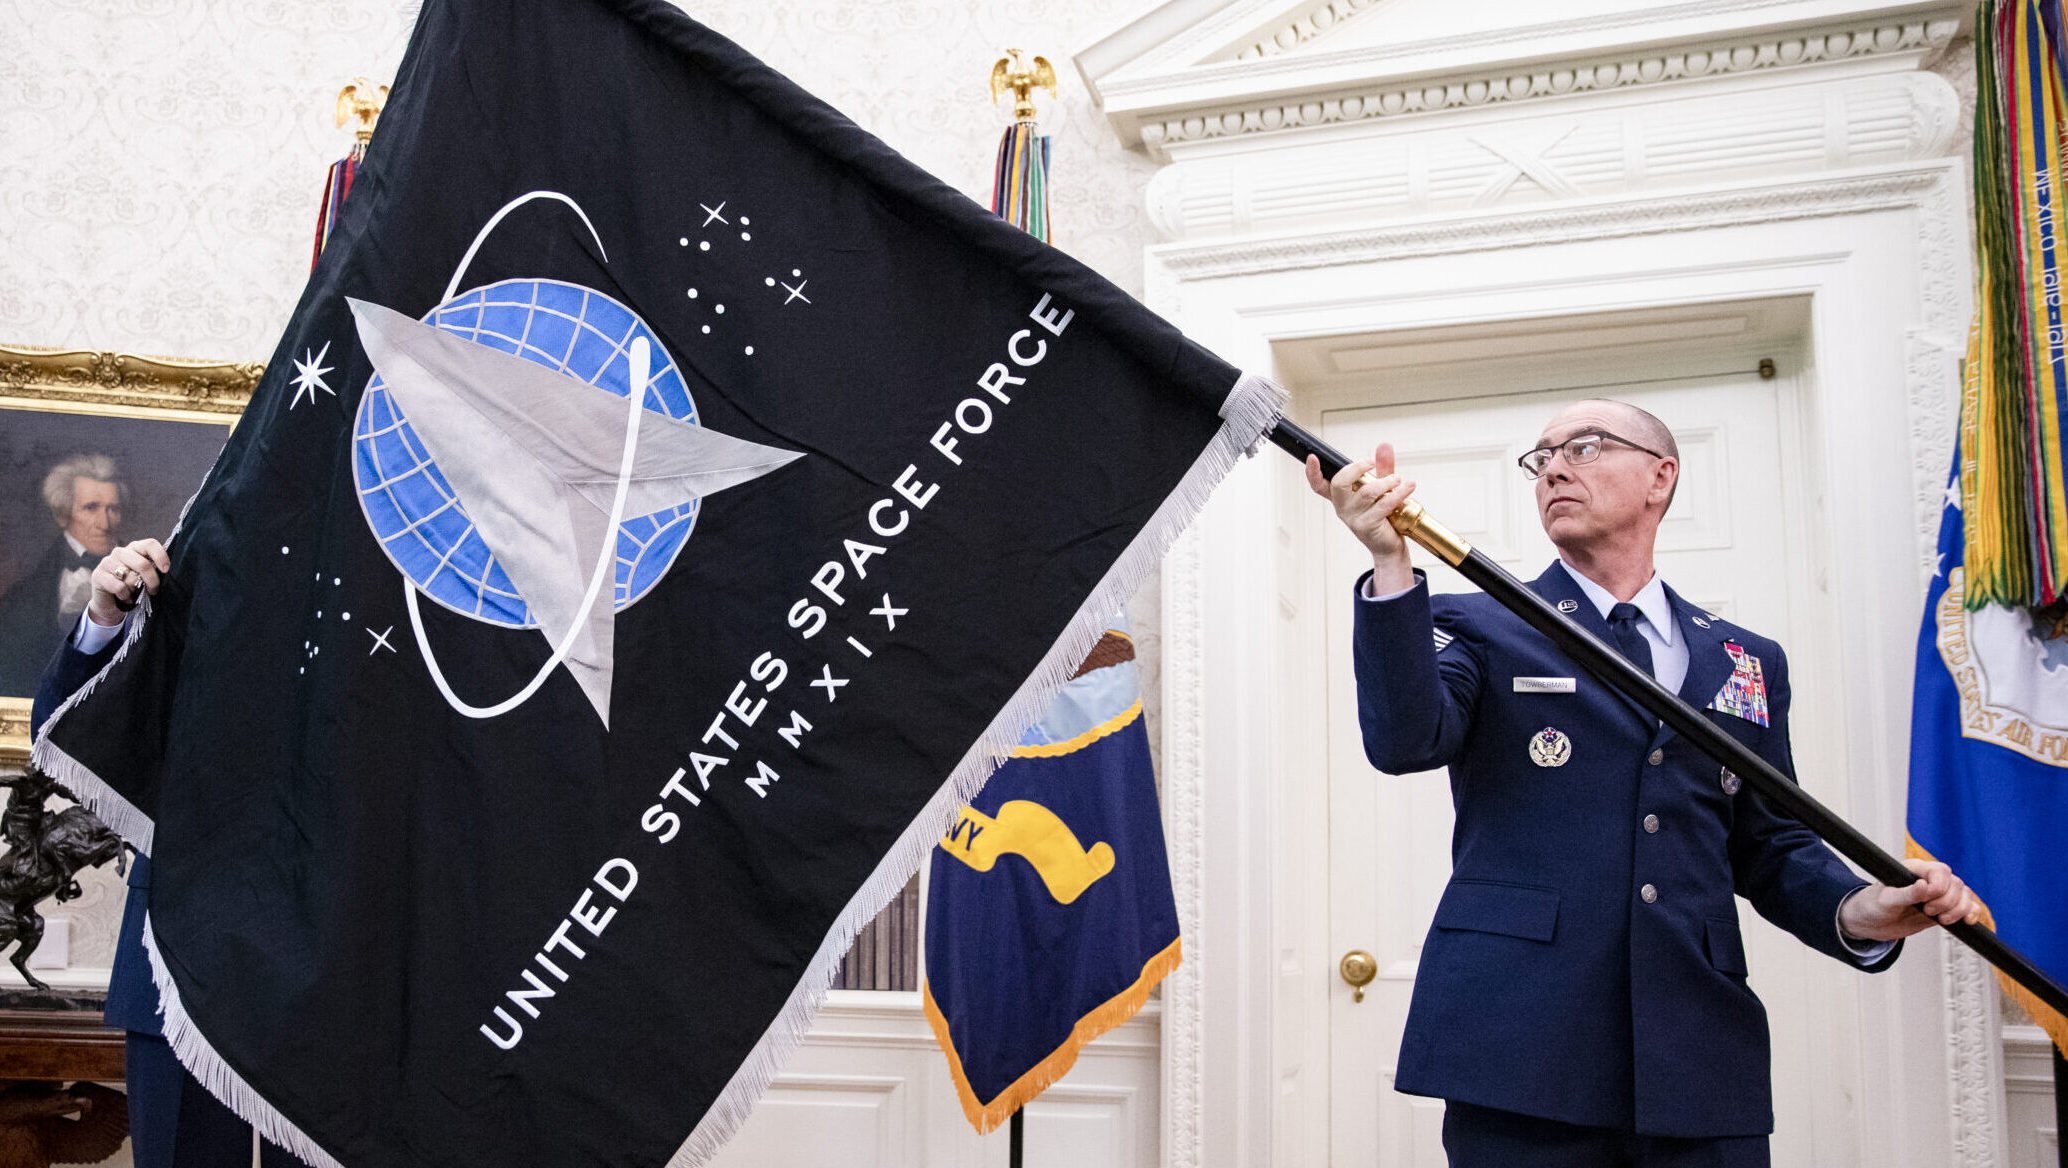 HAC-D scolds Space Force on lack of ‘realistic budgets’